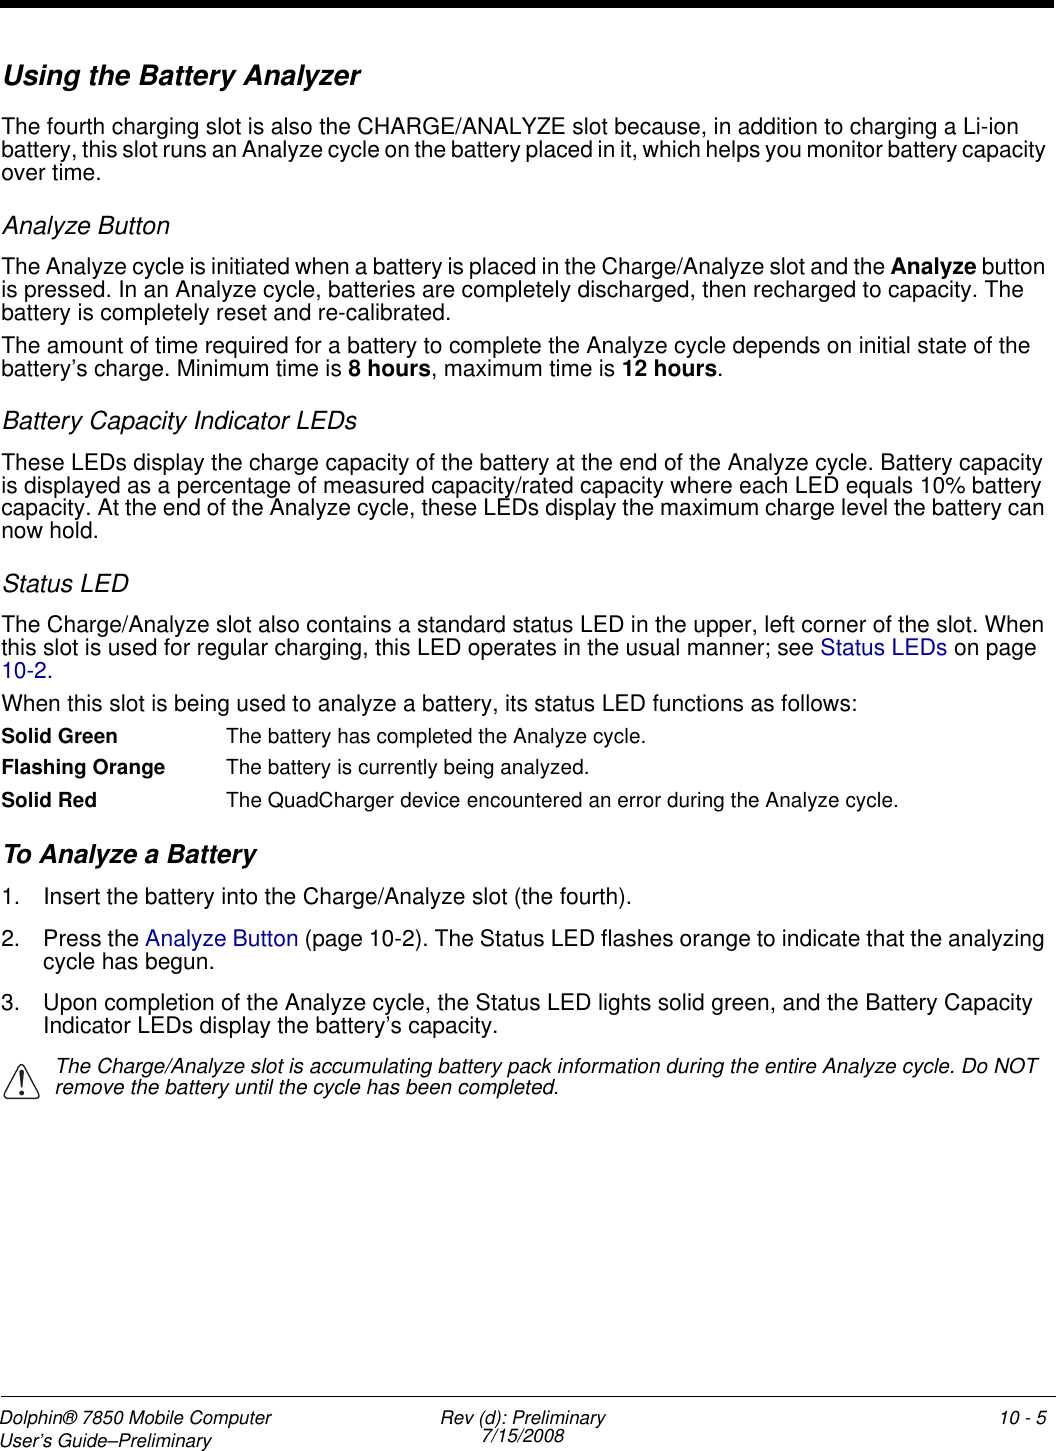 Dolphin® 7850 Mobile Computer  User’s Guide–Preliminary  Rev (d): Preliminary7/15/2008 10 - 5Using the Battery Analyzer The fourth charging slot is also the CHARGE/ANALYZE slot because, in addition to charging a Li-ion battery, this slot runs an Analyze cycle on the battery placed in it, which helps you monitor battery capacity over time. Analyze ButtonThe Analyze cycle is initiated when a battery is placed in the Charge/Analyze slot and the Analyze button is pressed. In an Analyze cycle, batteries are completely discharged, then recharged to capacity. The battery is completely reset and re-calibrated. The amount of time required for a battery to complete the Analyze cycle depends on initial state of the battery’s charge. Minimum time is 8 hours, maximum time is 12 hours.Battery Capacity Indicator LEDsThese LEDs display the charge capacity of the battery at the end of the Analyze cycle. Battery capacity is displayed as a percentage of measured capacity/rated capacity where each LED equals 10% battery capacity. At the end of the Analyze cycle, these LEDs display the maximum charge level the battery can now hold.Status LEDThe Charge/Analyze slot also contains a standard status LED in the upper, left corner of the slot. When this slot is used for regular charging, this LED operates in the usual manner; see Status LEDs on page 10-2.When this slot is being used to analyze a battery, its status LED functions as follows:Solid Green The battery has completed the Analyze cycle. Flashing Orange The battery is currently being analyzed. Solid Red The QuadCharger device encountered an error during the Analyze cycle.To Analyze a Battery1. Insert the battery into the Charge/Analyze slot (the fourth).2. Press the Analyze Button (page 10-2). The Status LED flashes orange to indicate that the analyzing cycle has begun.3. Upon completion of the Analyze cycle, the Status LED lights solid green, and the Battery Capacity Indicator LEDs display the battery’s capacity.The Charge/Analyze slot is accumulating battery pack information during the entire Analyze cycle. Do NOT remove the battery until the cycle has been completed. !